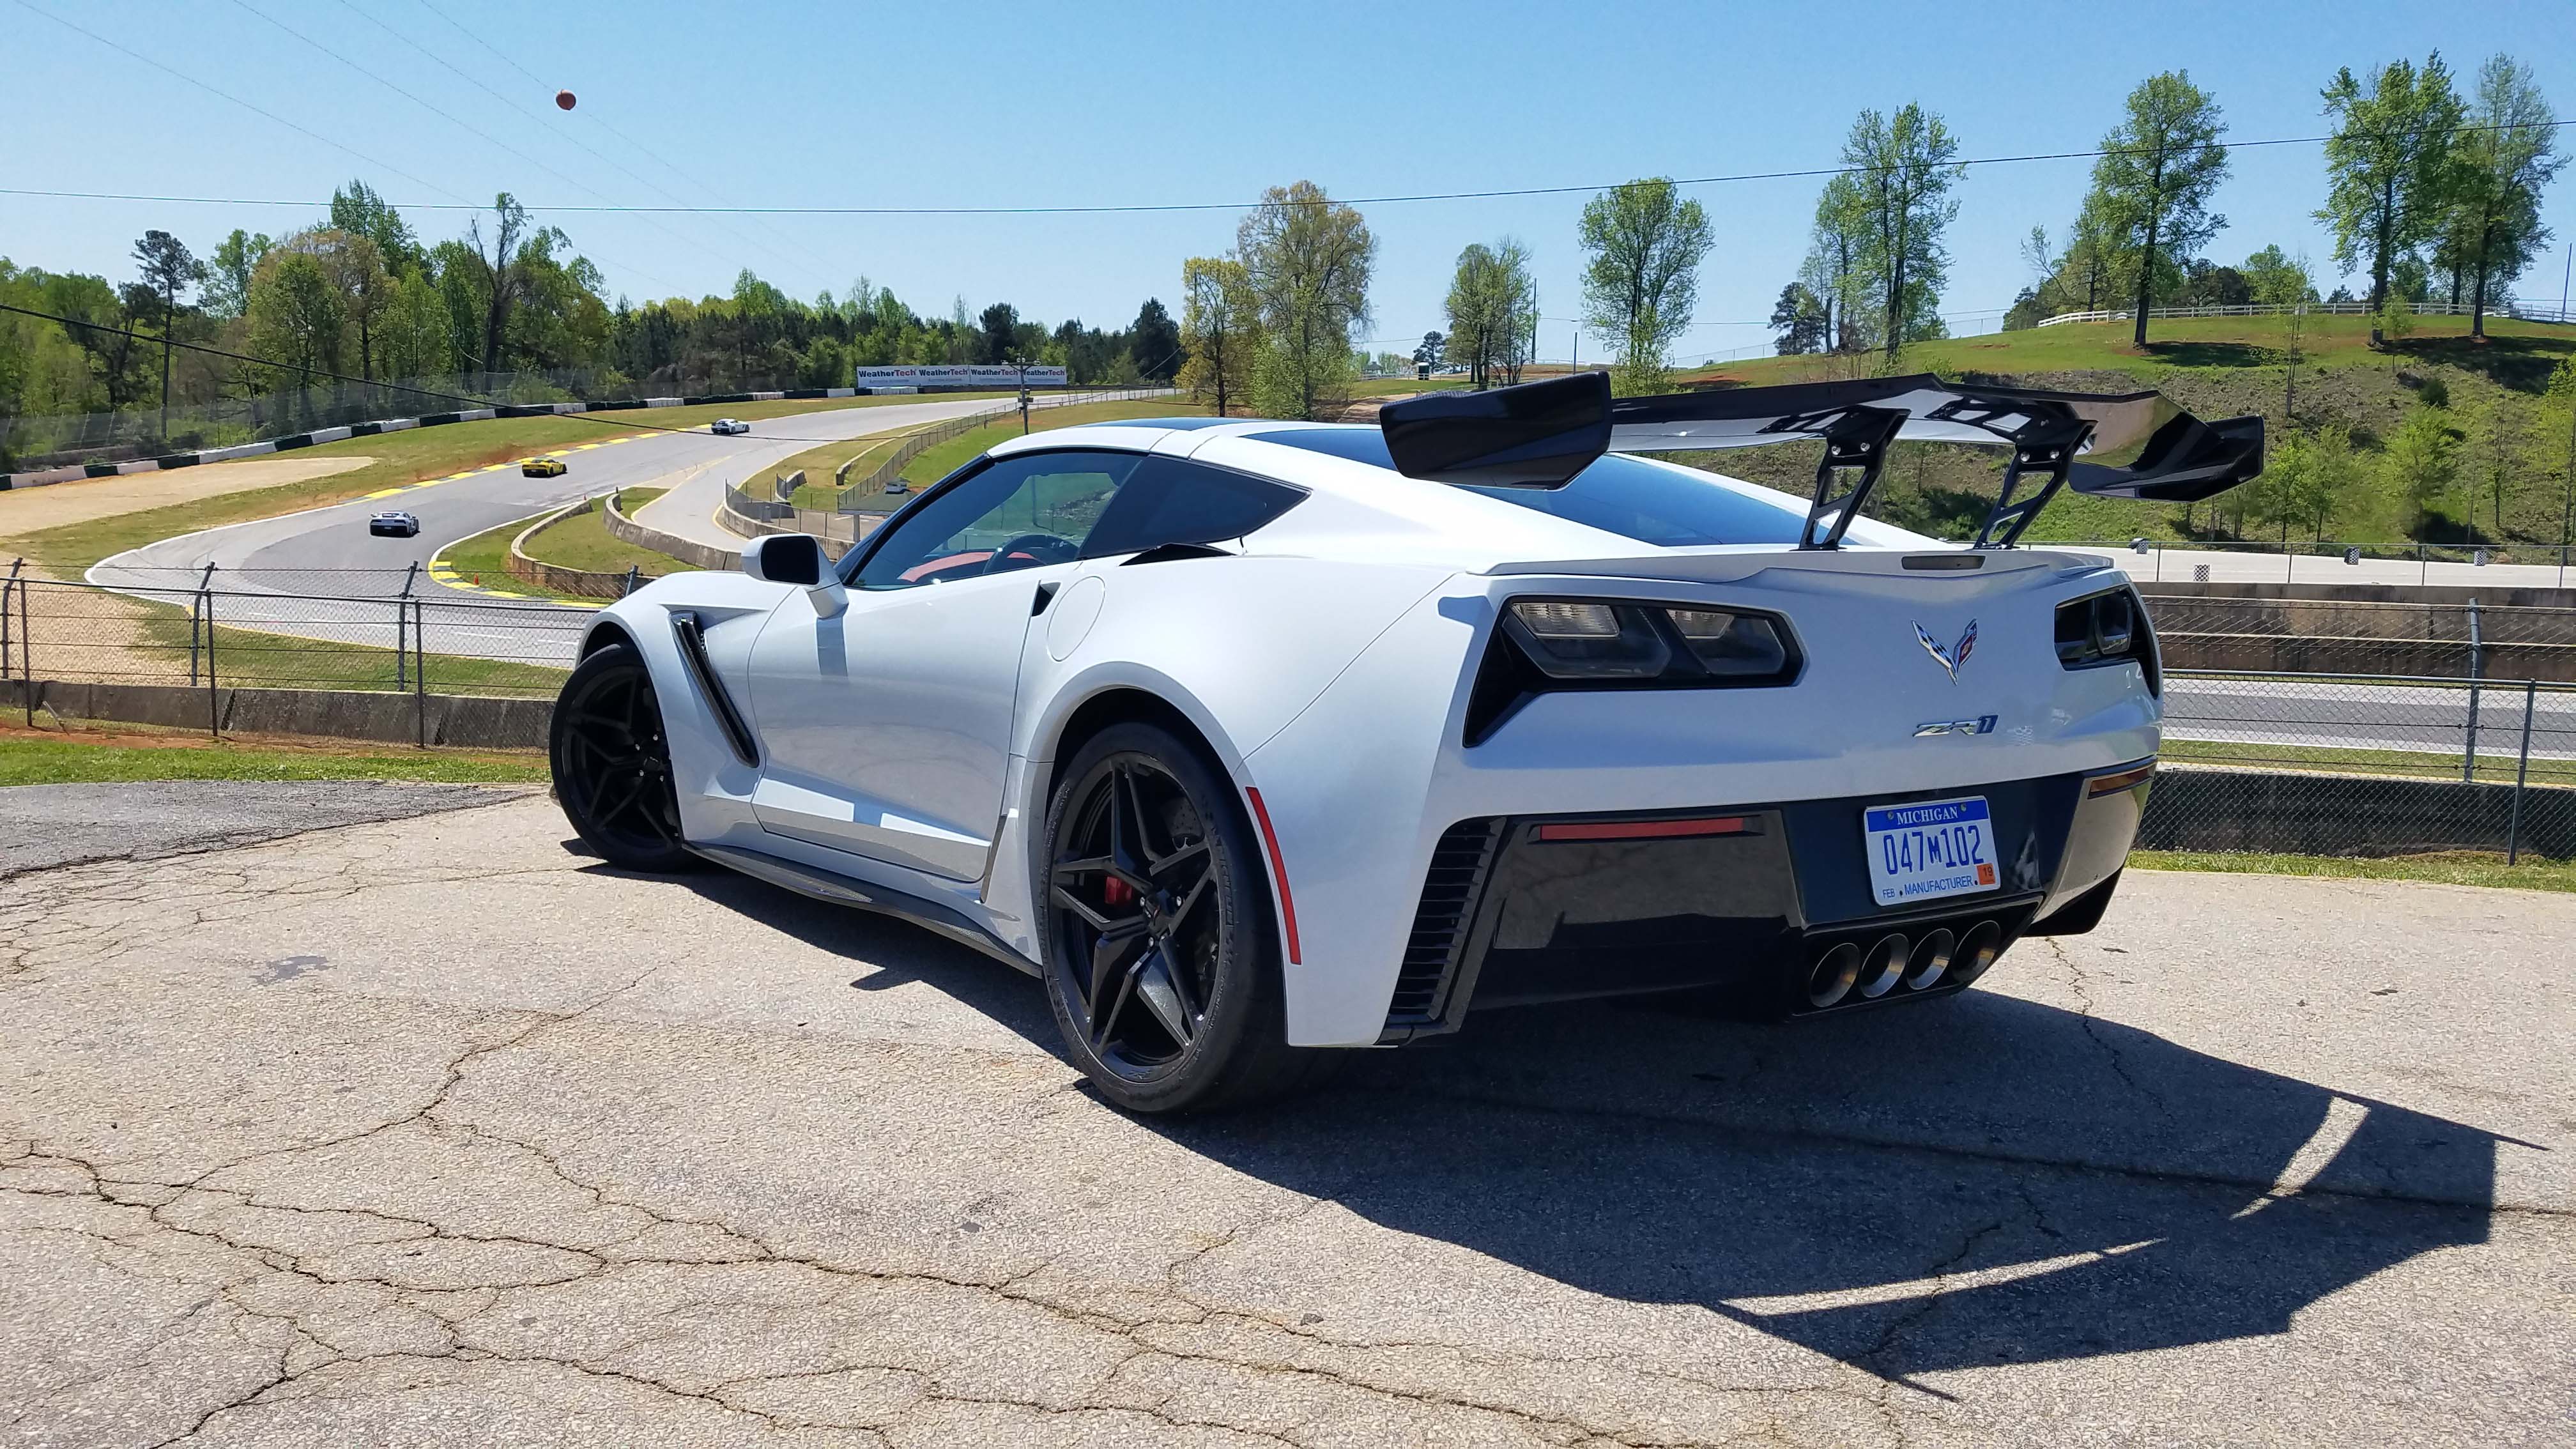 The wing's the thing. On Road Atlanta race track, the 755-horse Corvette ZR1 impresses with raw speed and nimble handling.